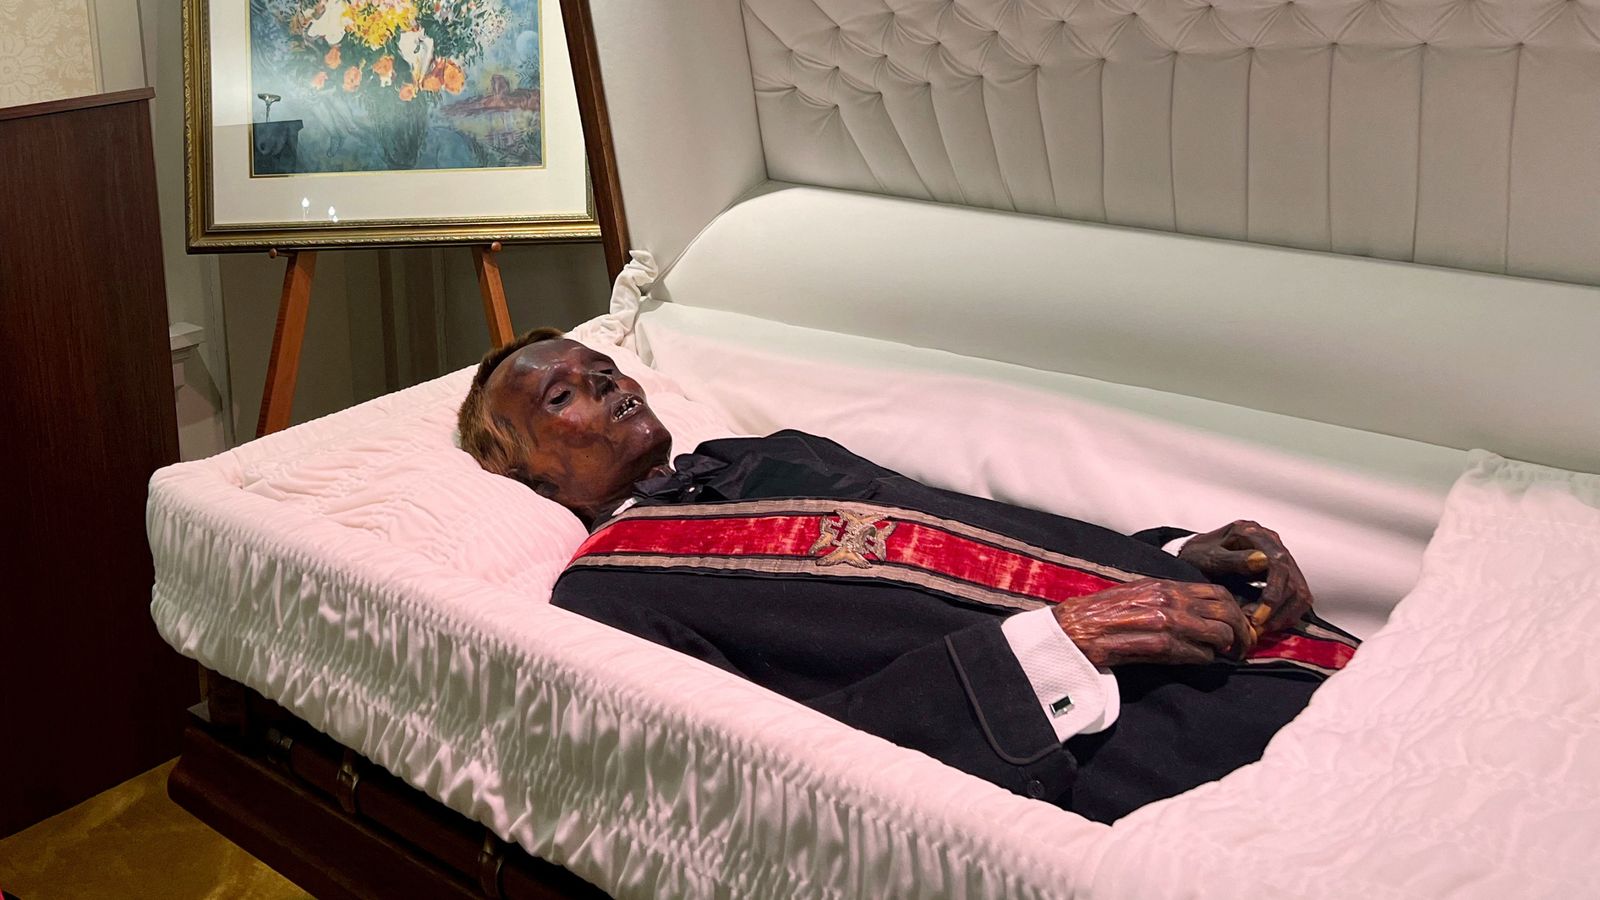 Stoneman Willie: Mummified man to be buried after 128 years on display in Pennsylvania